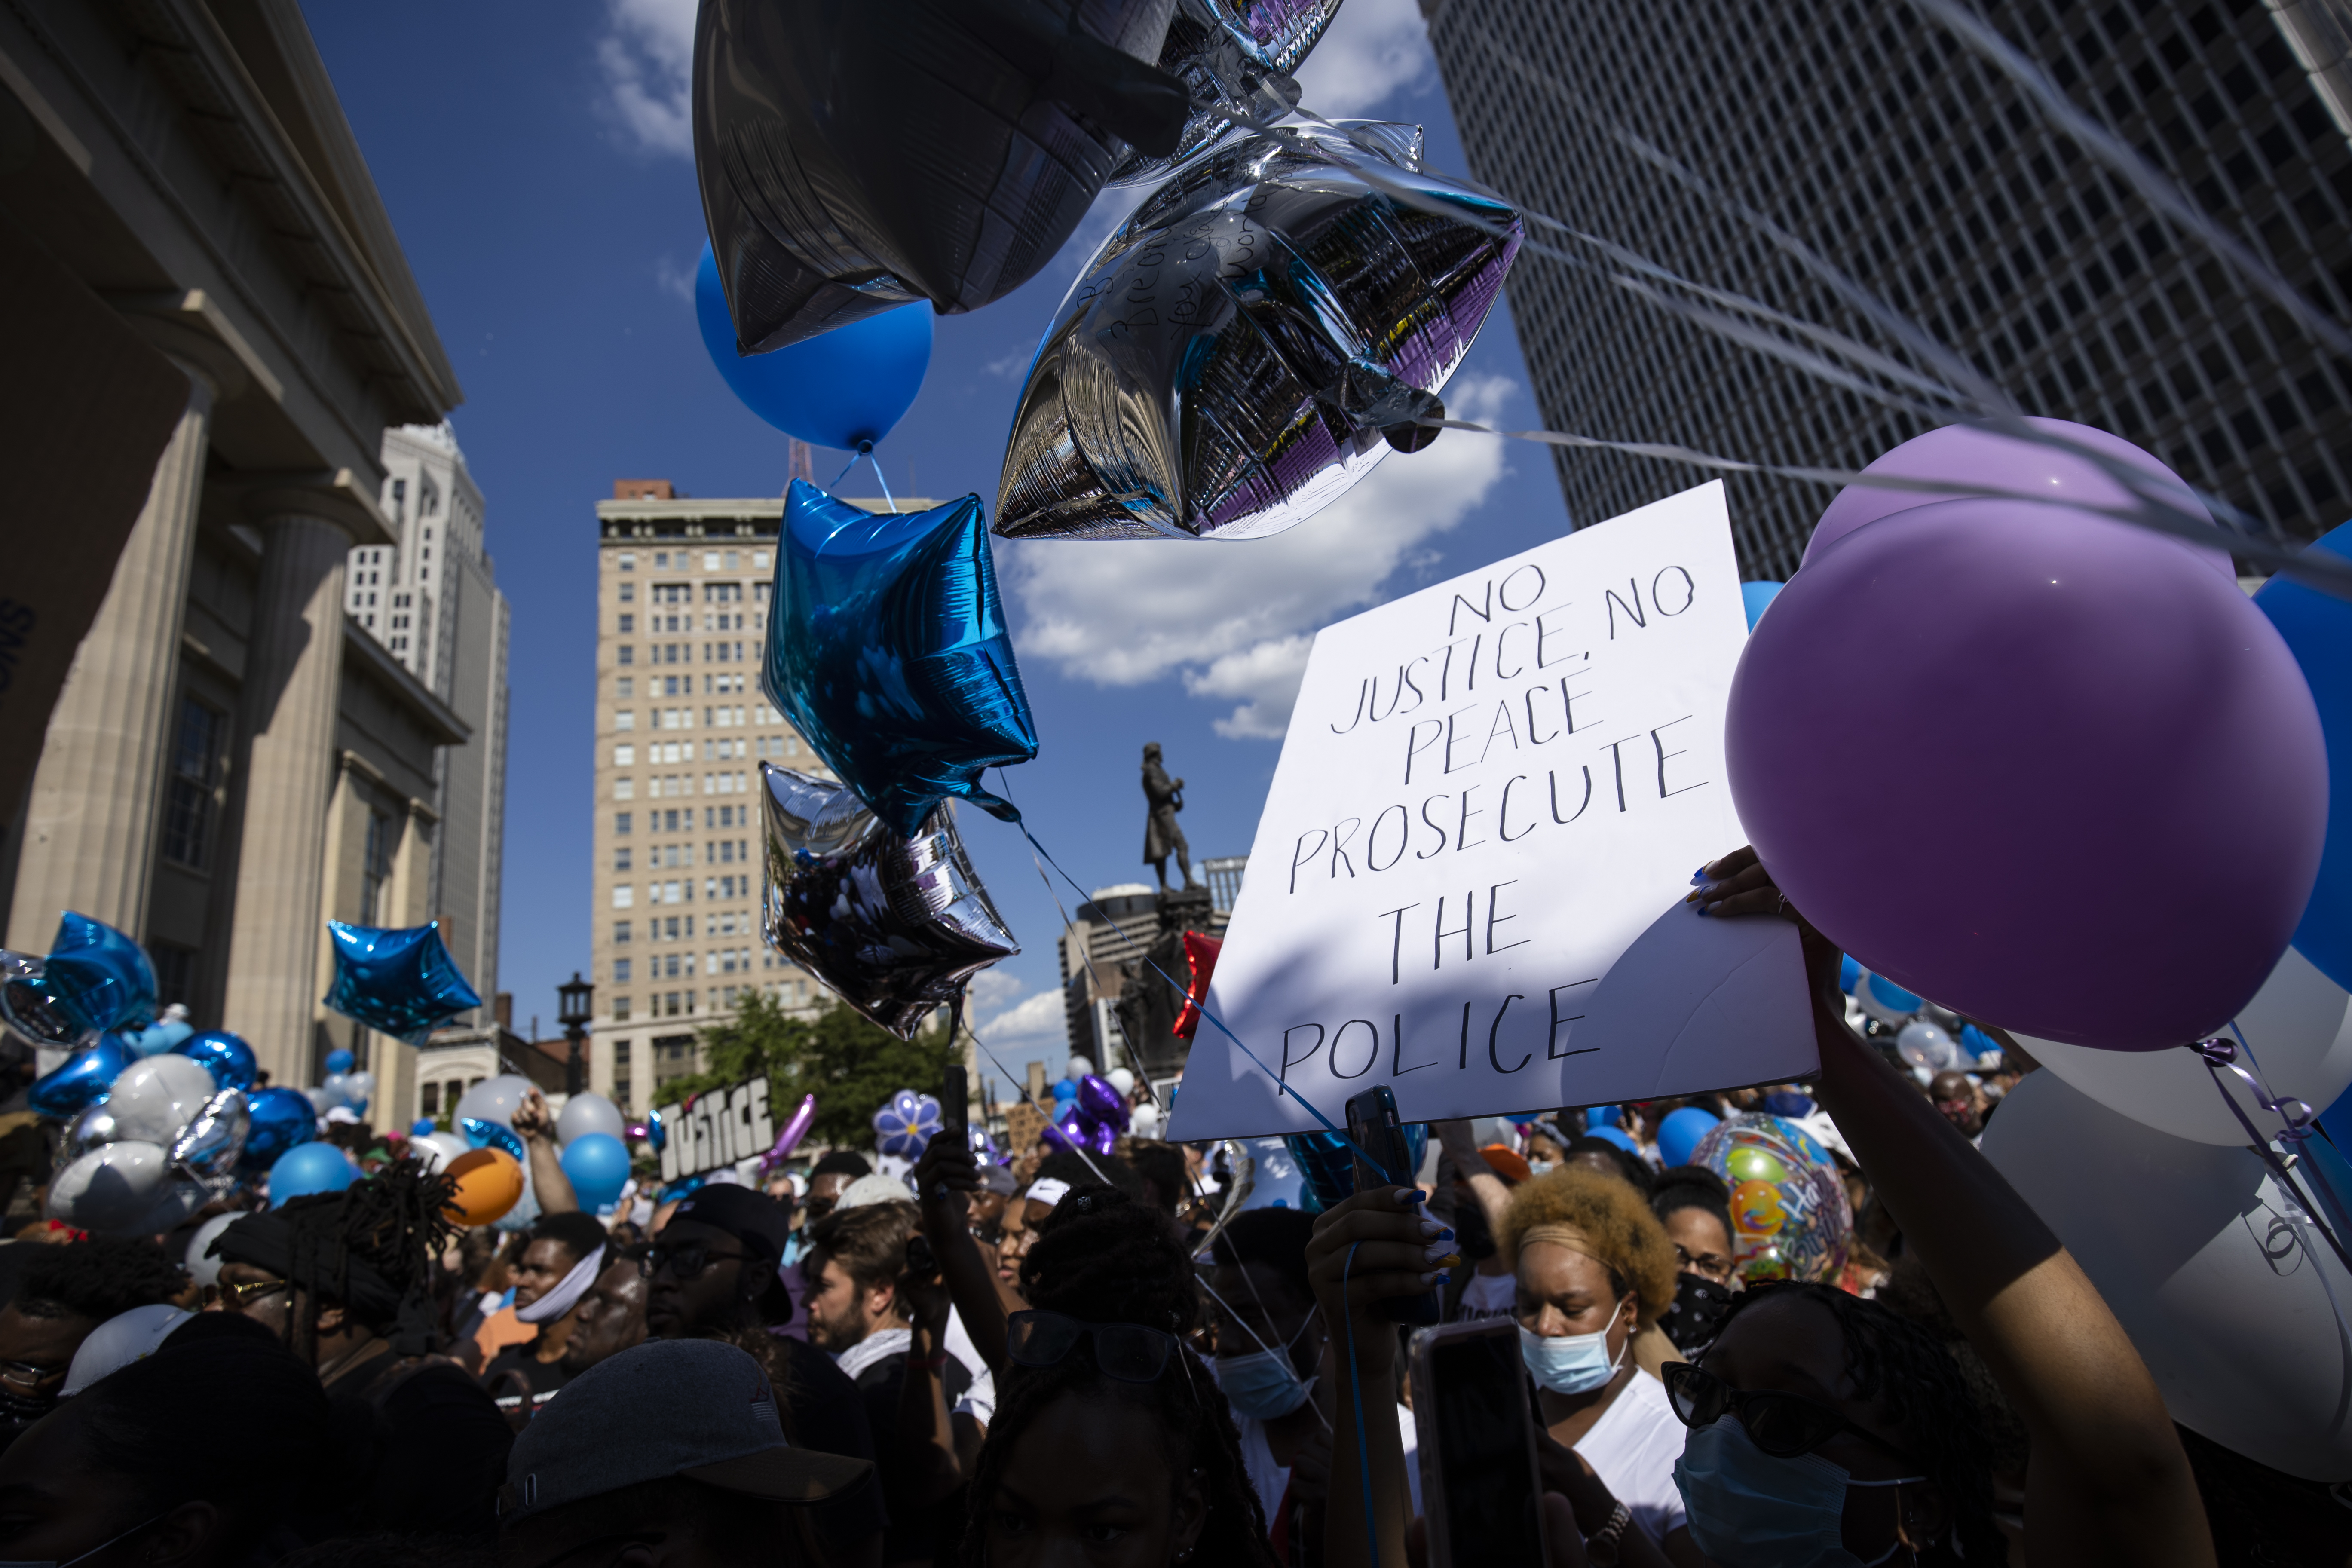 People gather with balloons for a vigil in memory of Breonna Taylor on June 6, 2020 in Louisville, Kentucky.